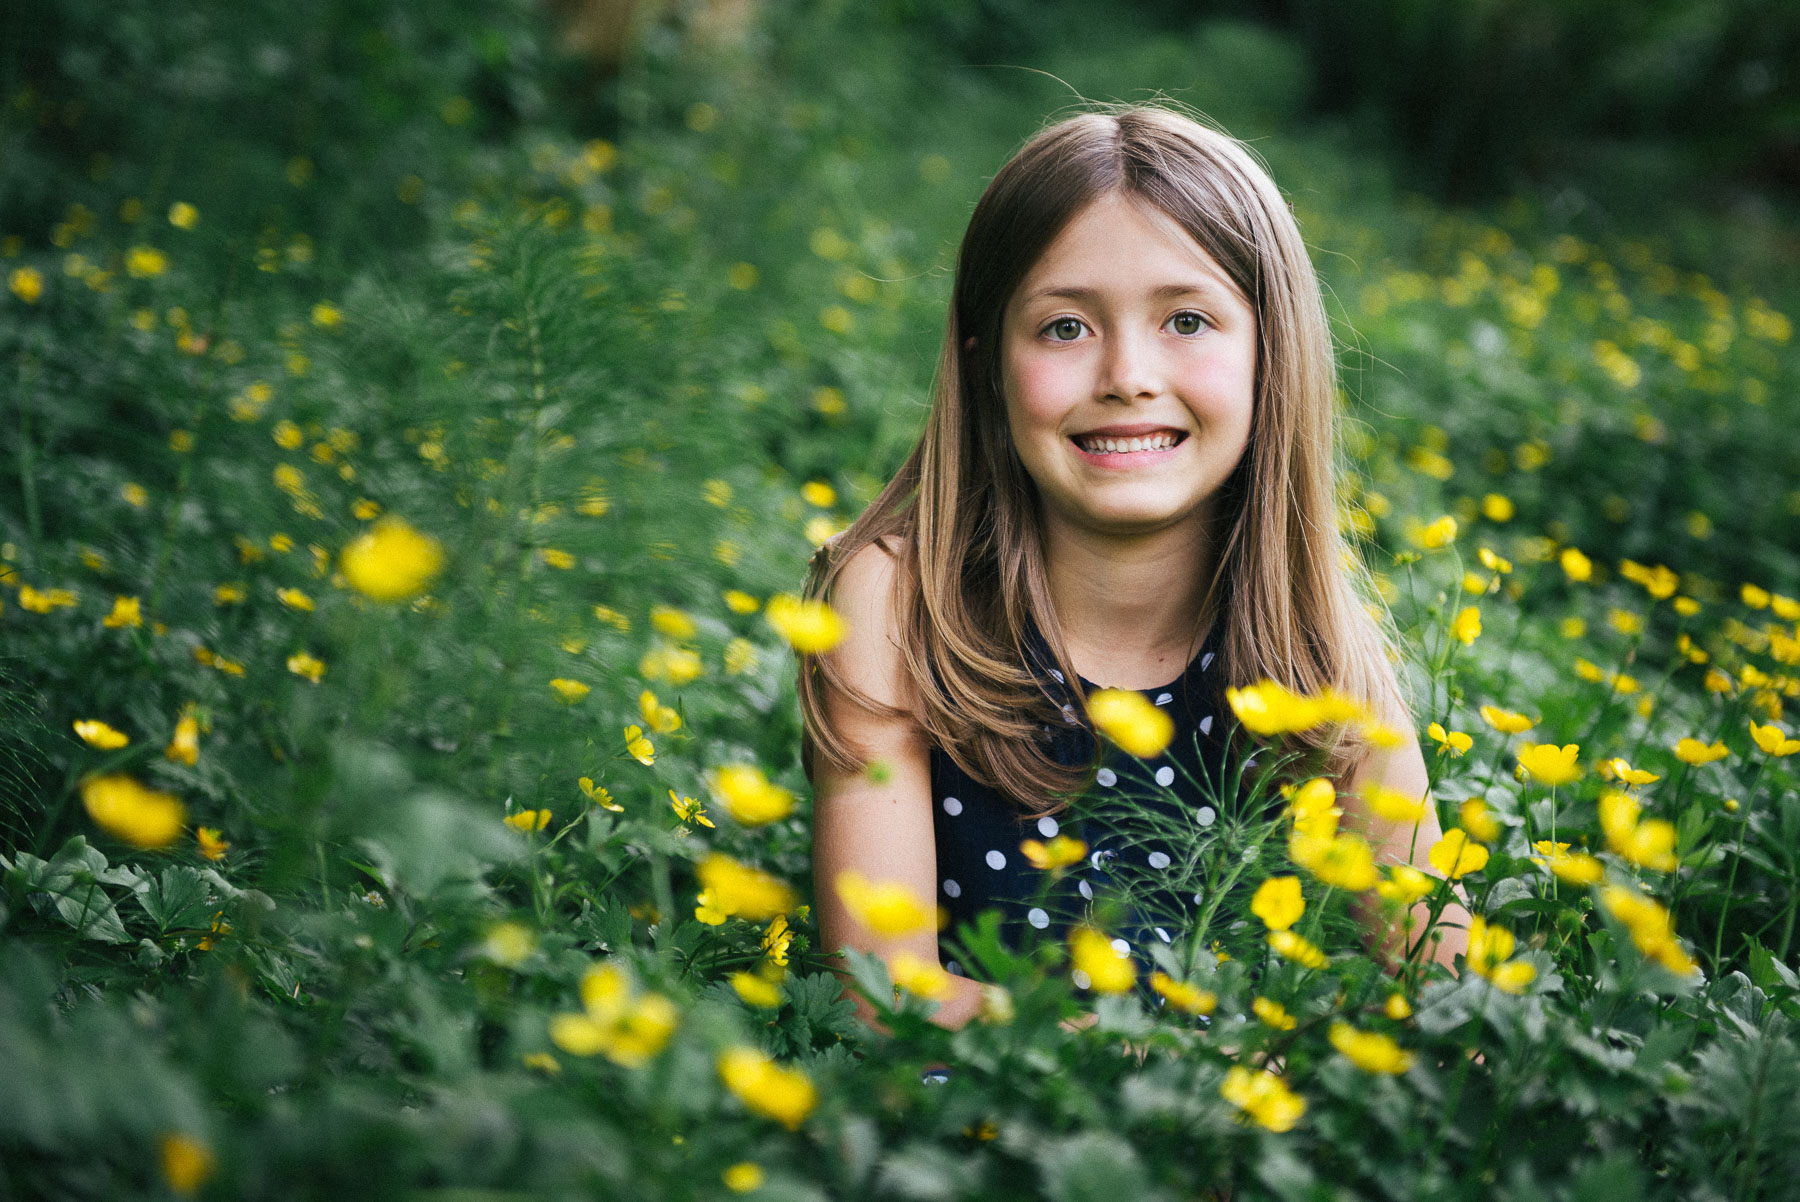 Caucasian young girl smiling among green plants with yellow flowers